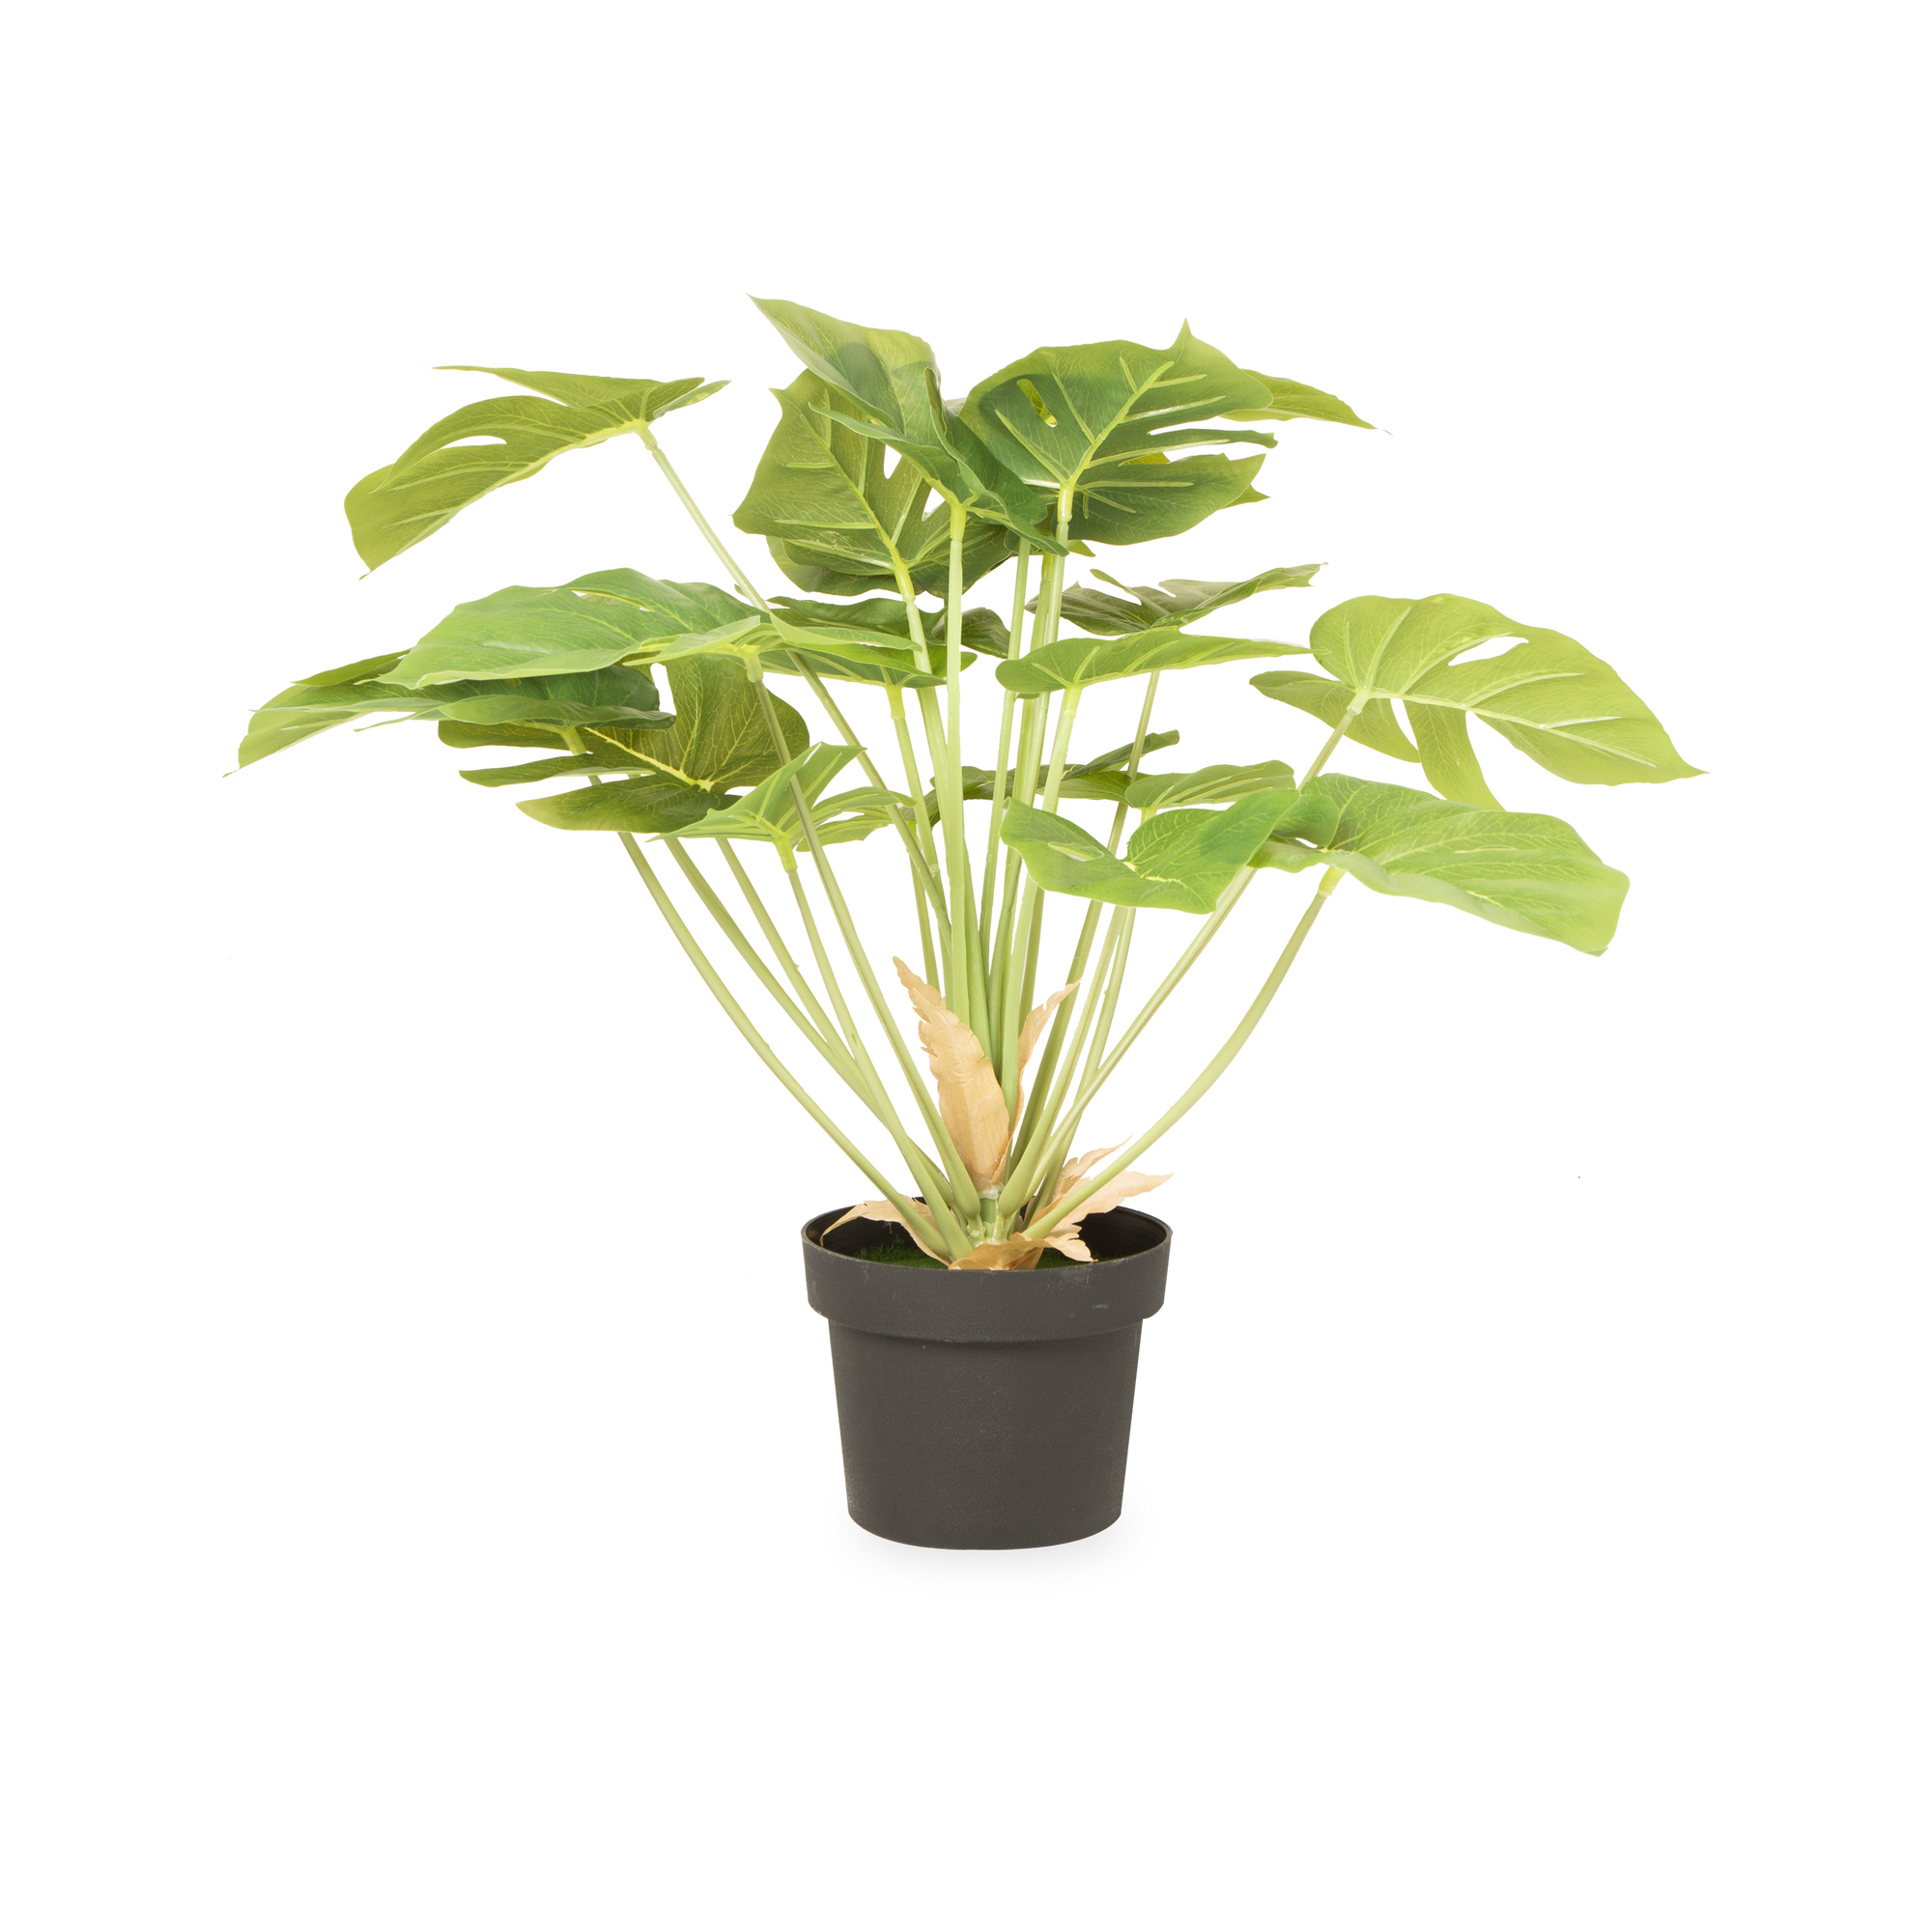 This artifical Monstera plant is an ideal house plant, with its lush green color and large glossy leaves.